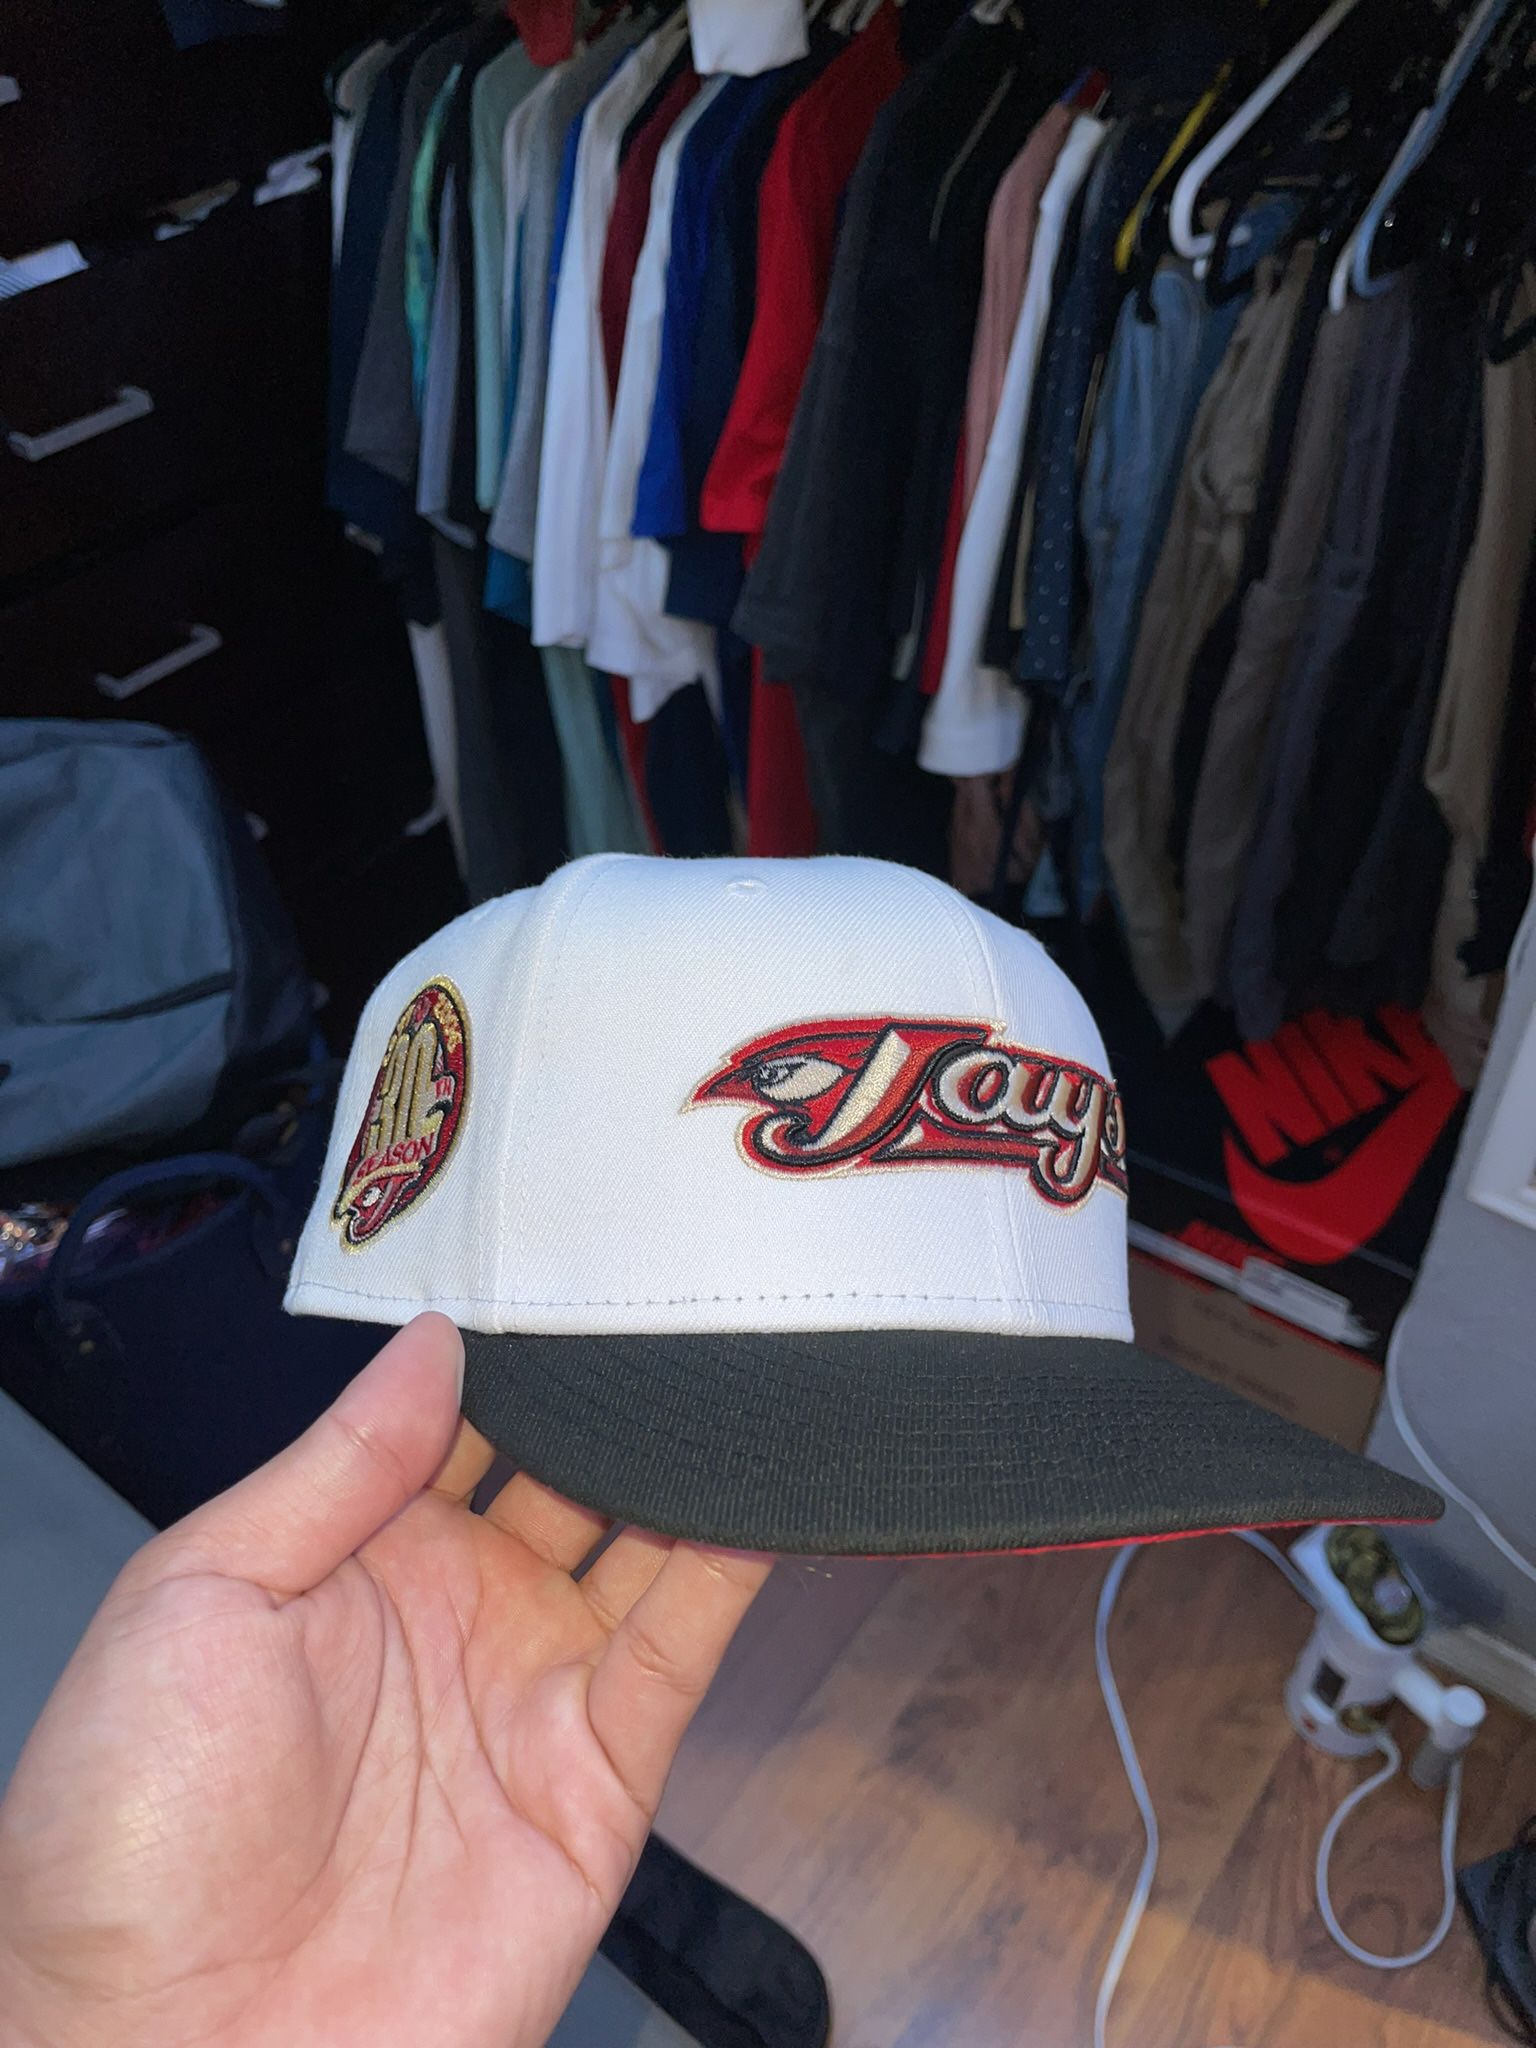 Blue Jays Fitted Hat for Sale in San Diego, CA - OfferUp